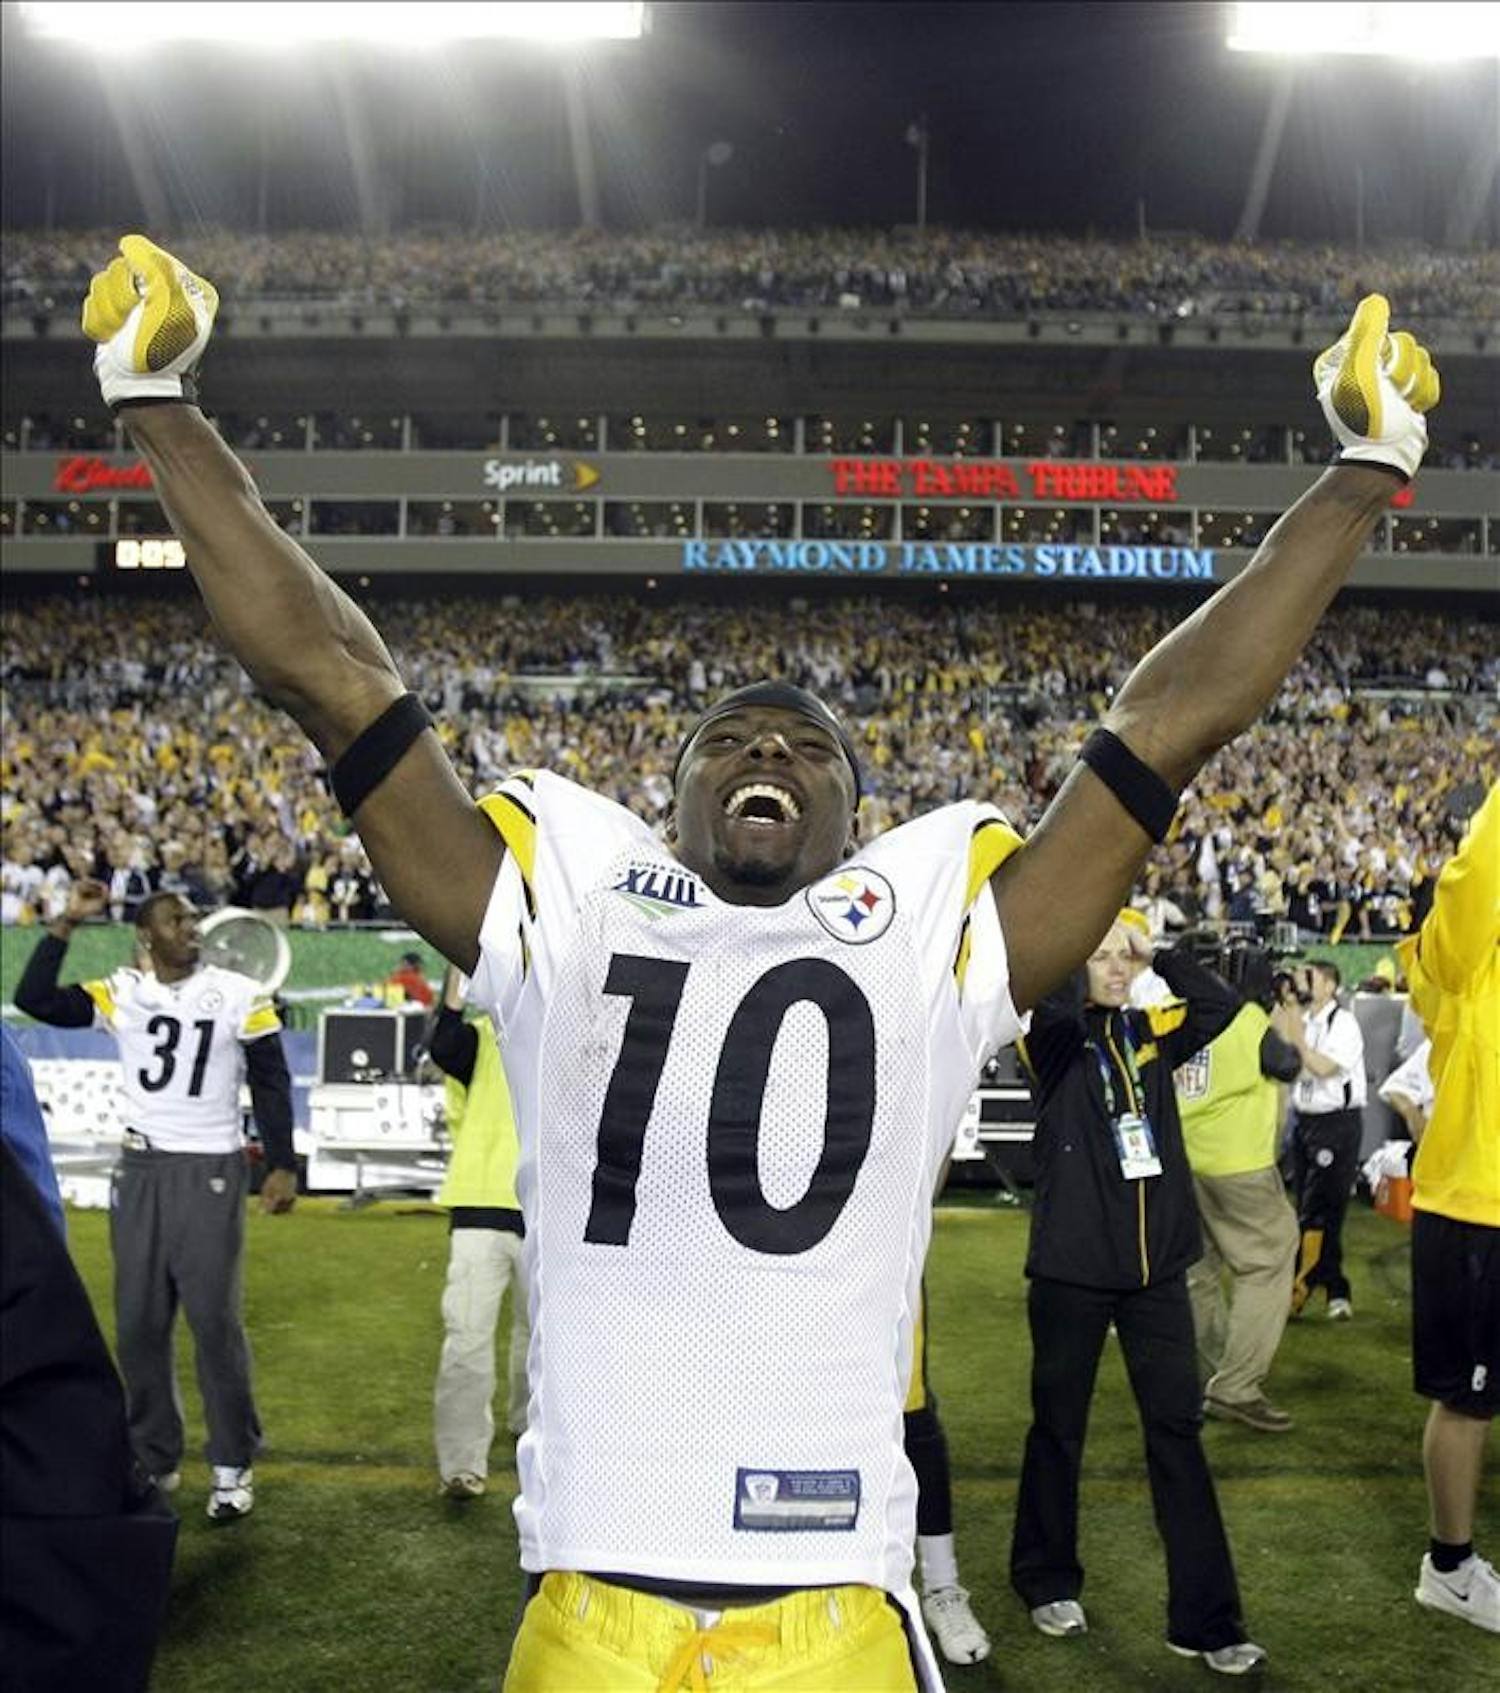 Pittsburgh Steelers wide receiver Santonio Holmes celebrates following Pittsburgh's 27-23 win over the Arizona Cardinals in the NFL Super Bowl XLIII football game, Sunday, Feb. 1, 2009, in Tampa, Fla. Holmes caught the game-winning touchdown pass.